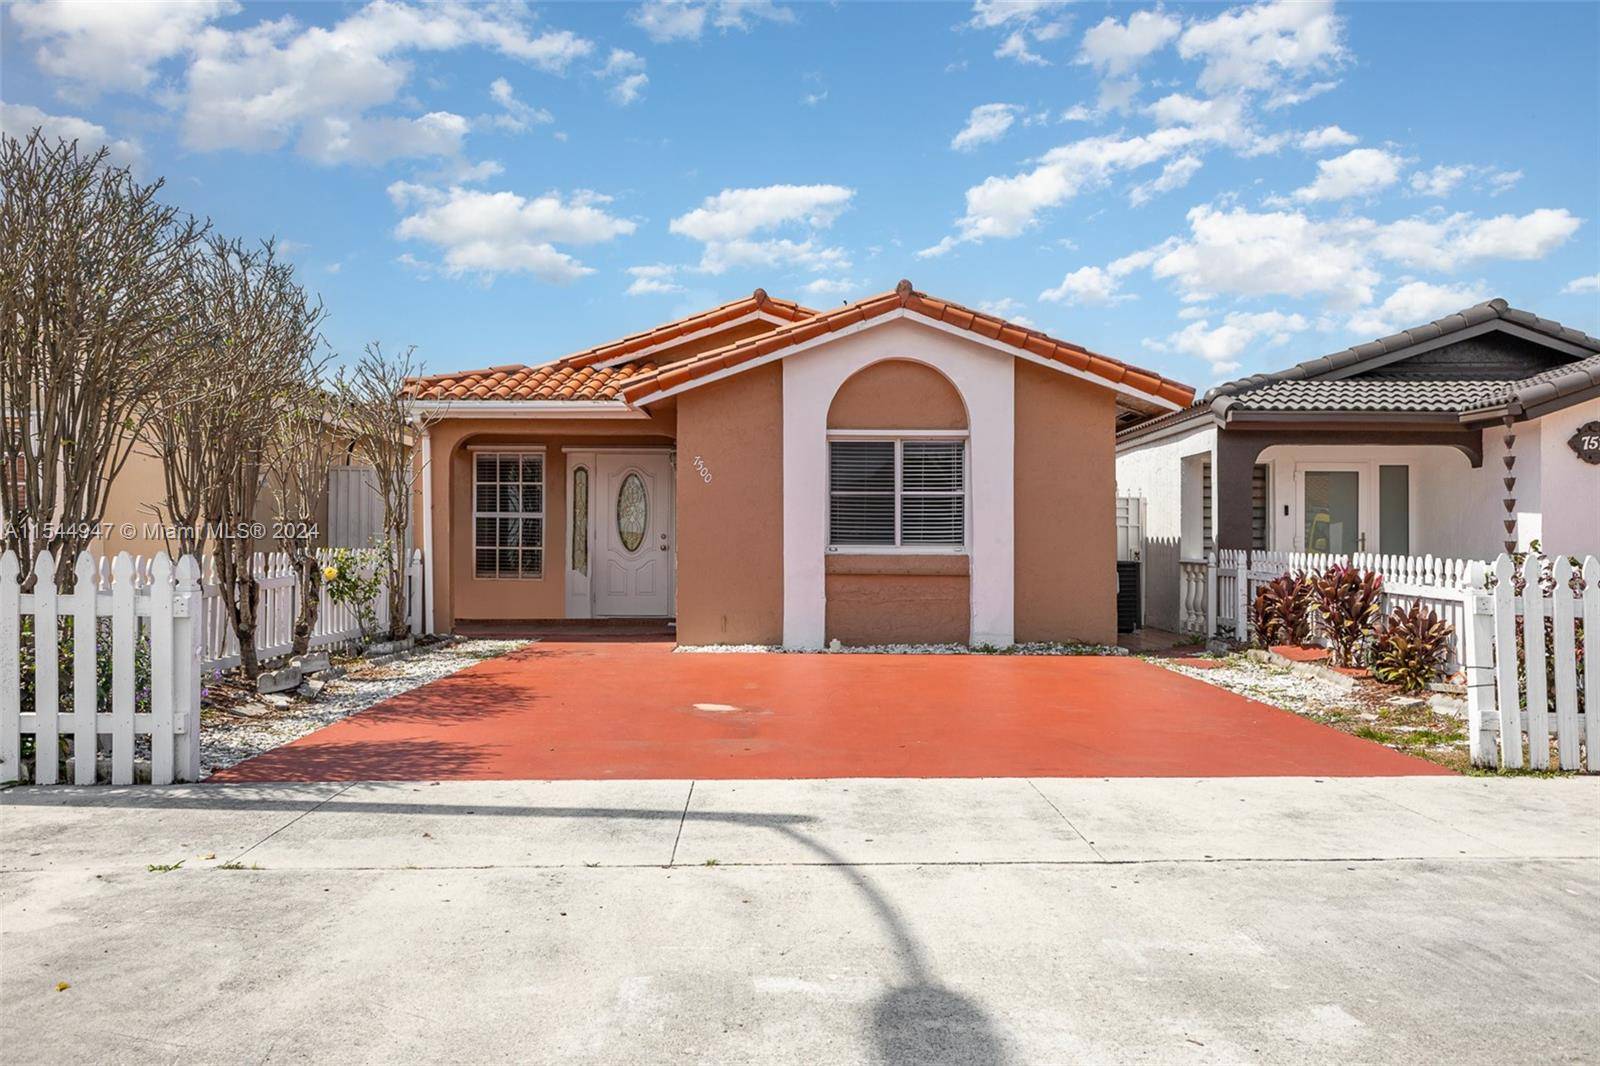 Charming 3 bedroom 2 bath home centrally located in Hialeah Gardens.